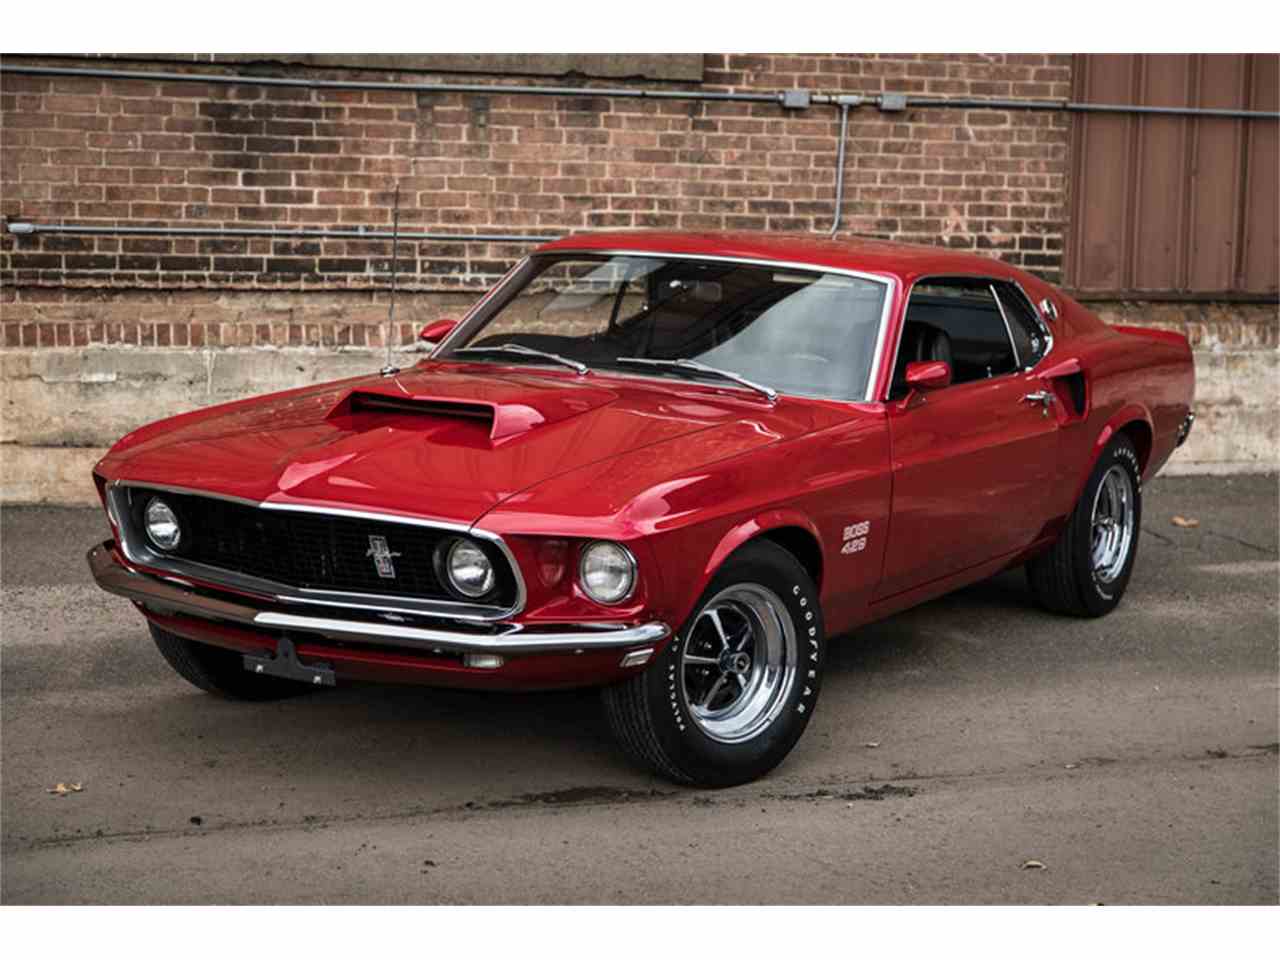 1969 Ford Mustang for Sale  ClassicCars.com  CC1039230